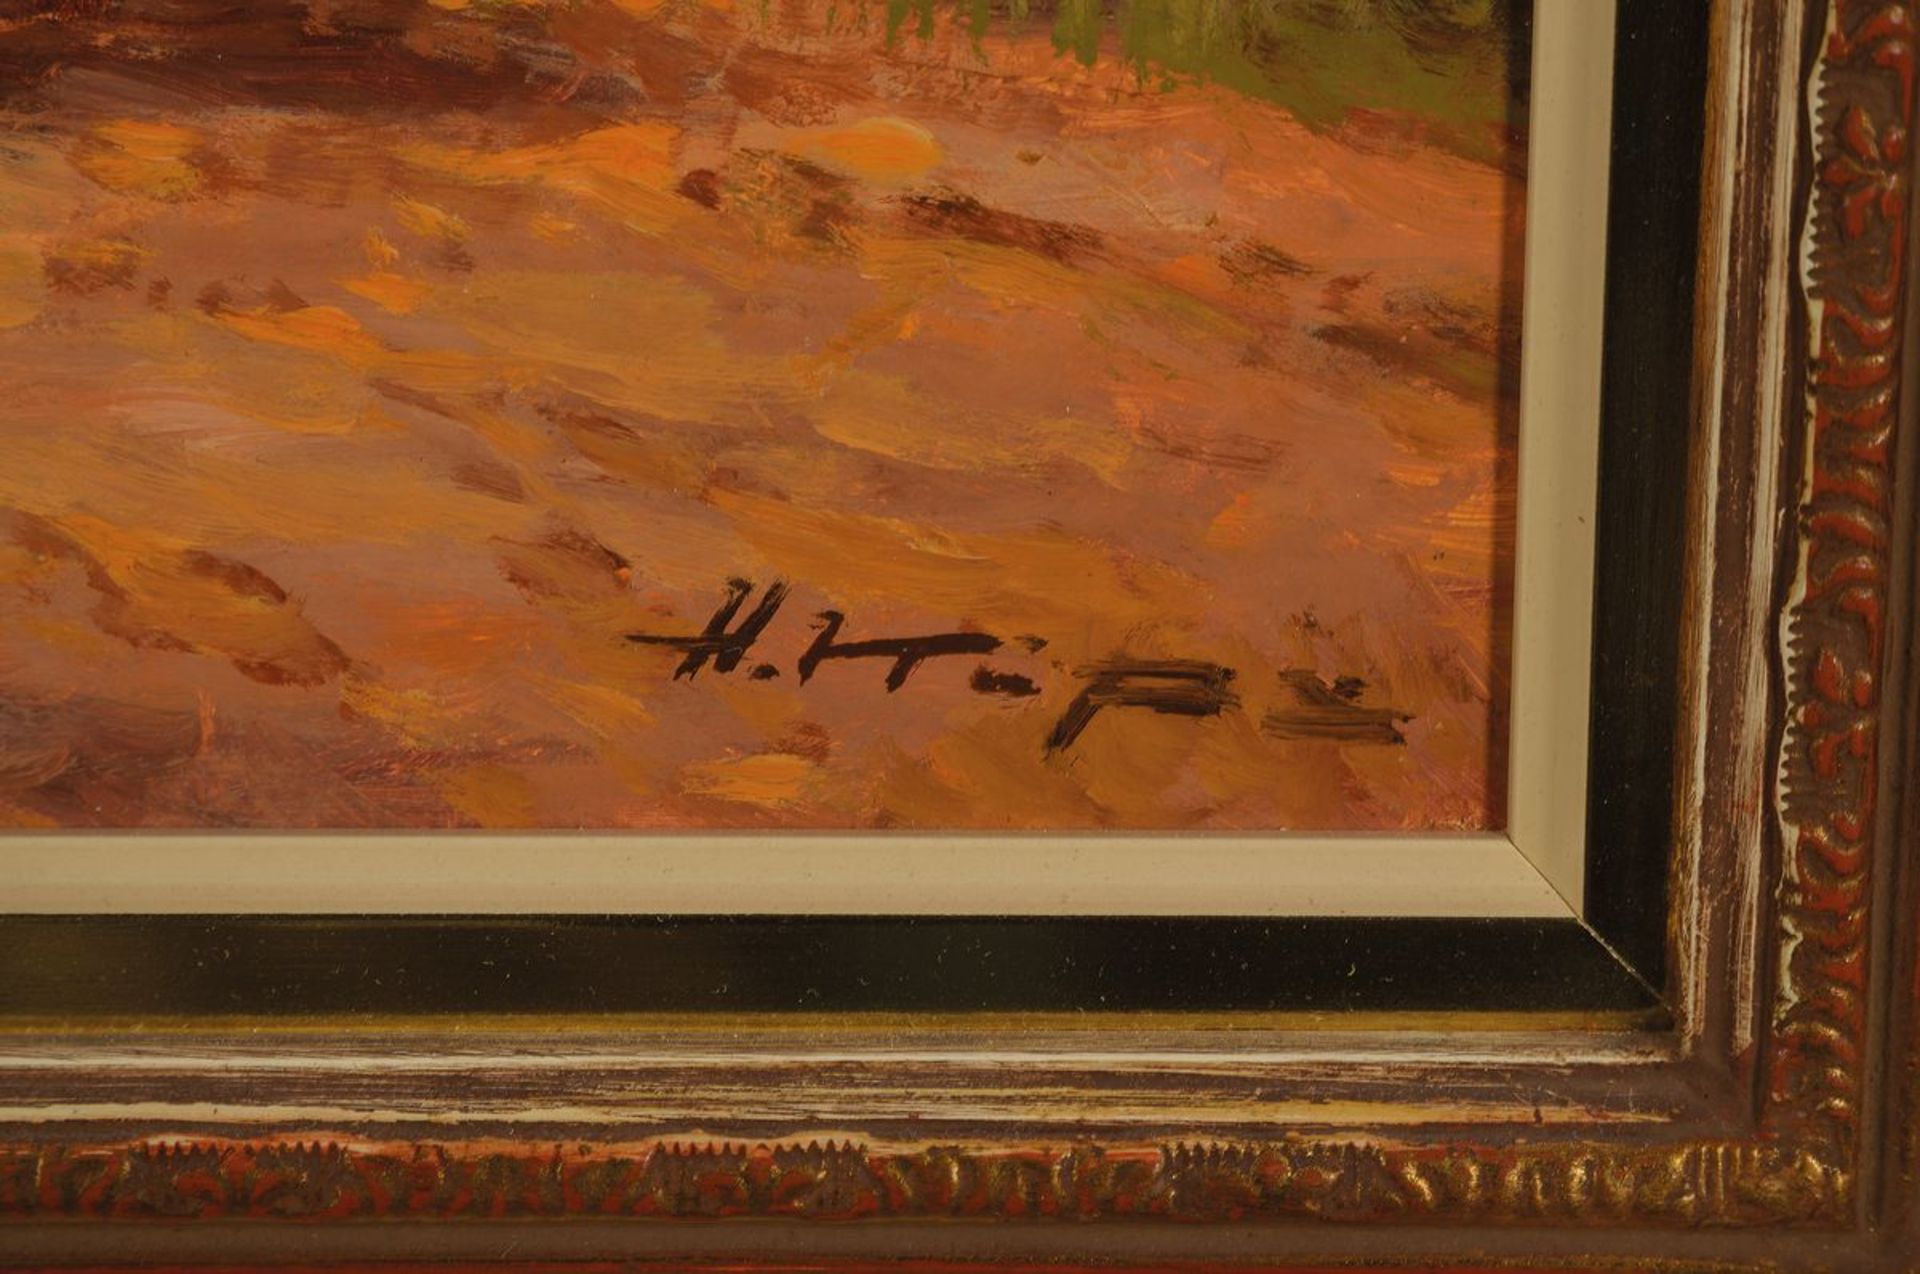 Helmut Kips, born 1937 Krefeld, carriage and stroller in forest, oil / wood, signed lower right, - Image 2 of 3